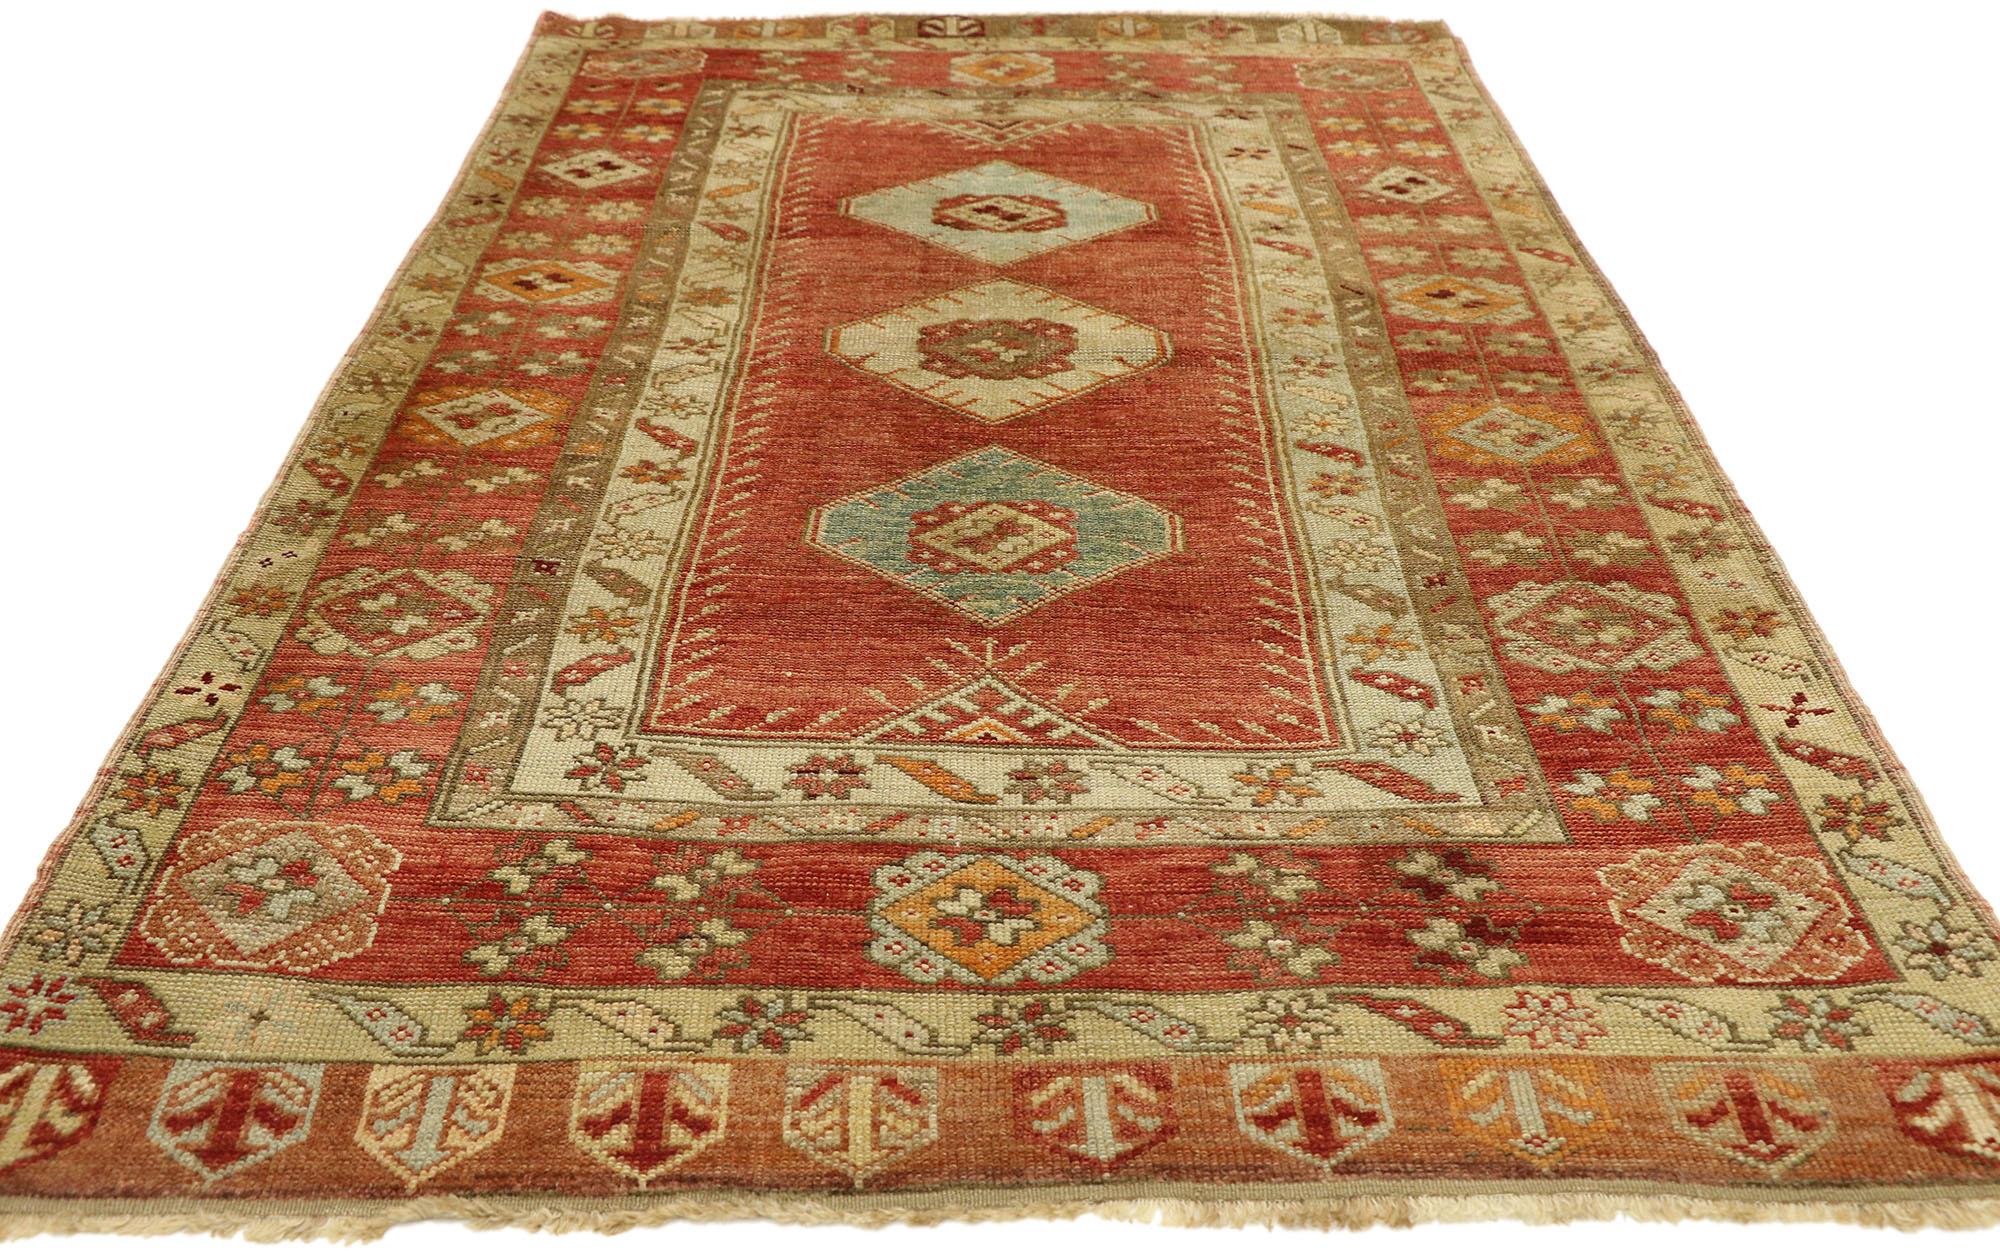 Hand-Knotted Vintage Turkish Oushak Rug with Rustic Artisan Spanish Colonial Style